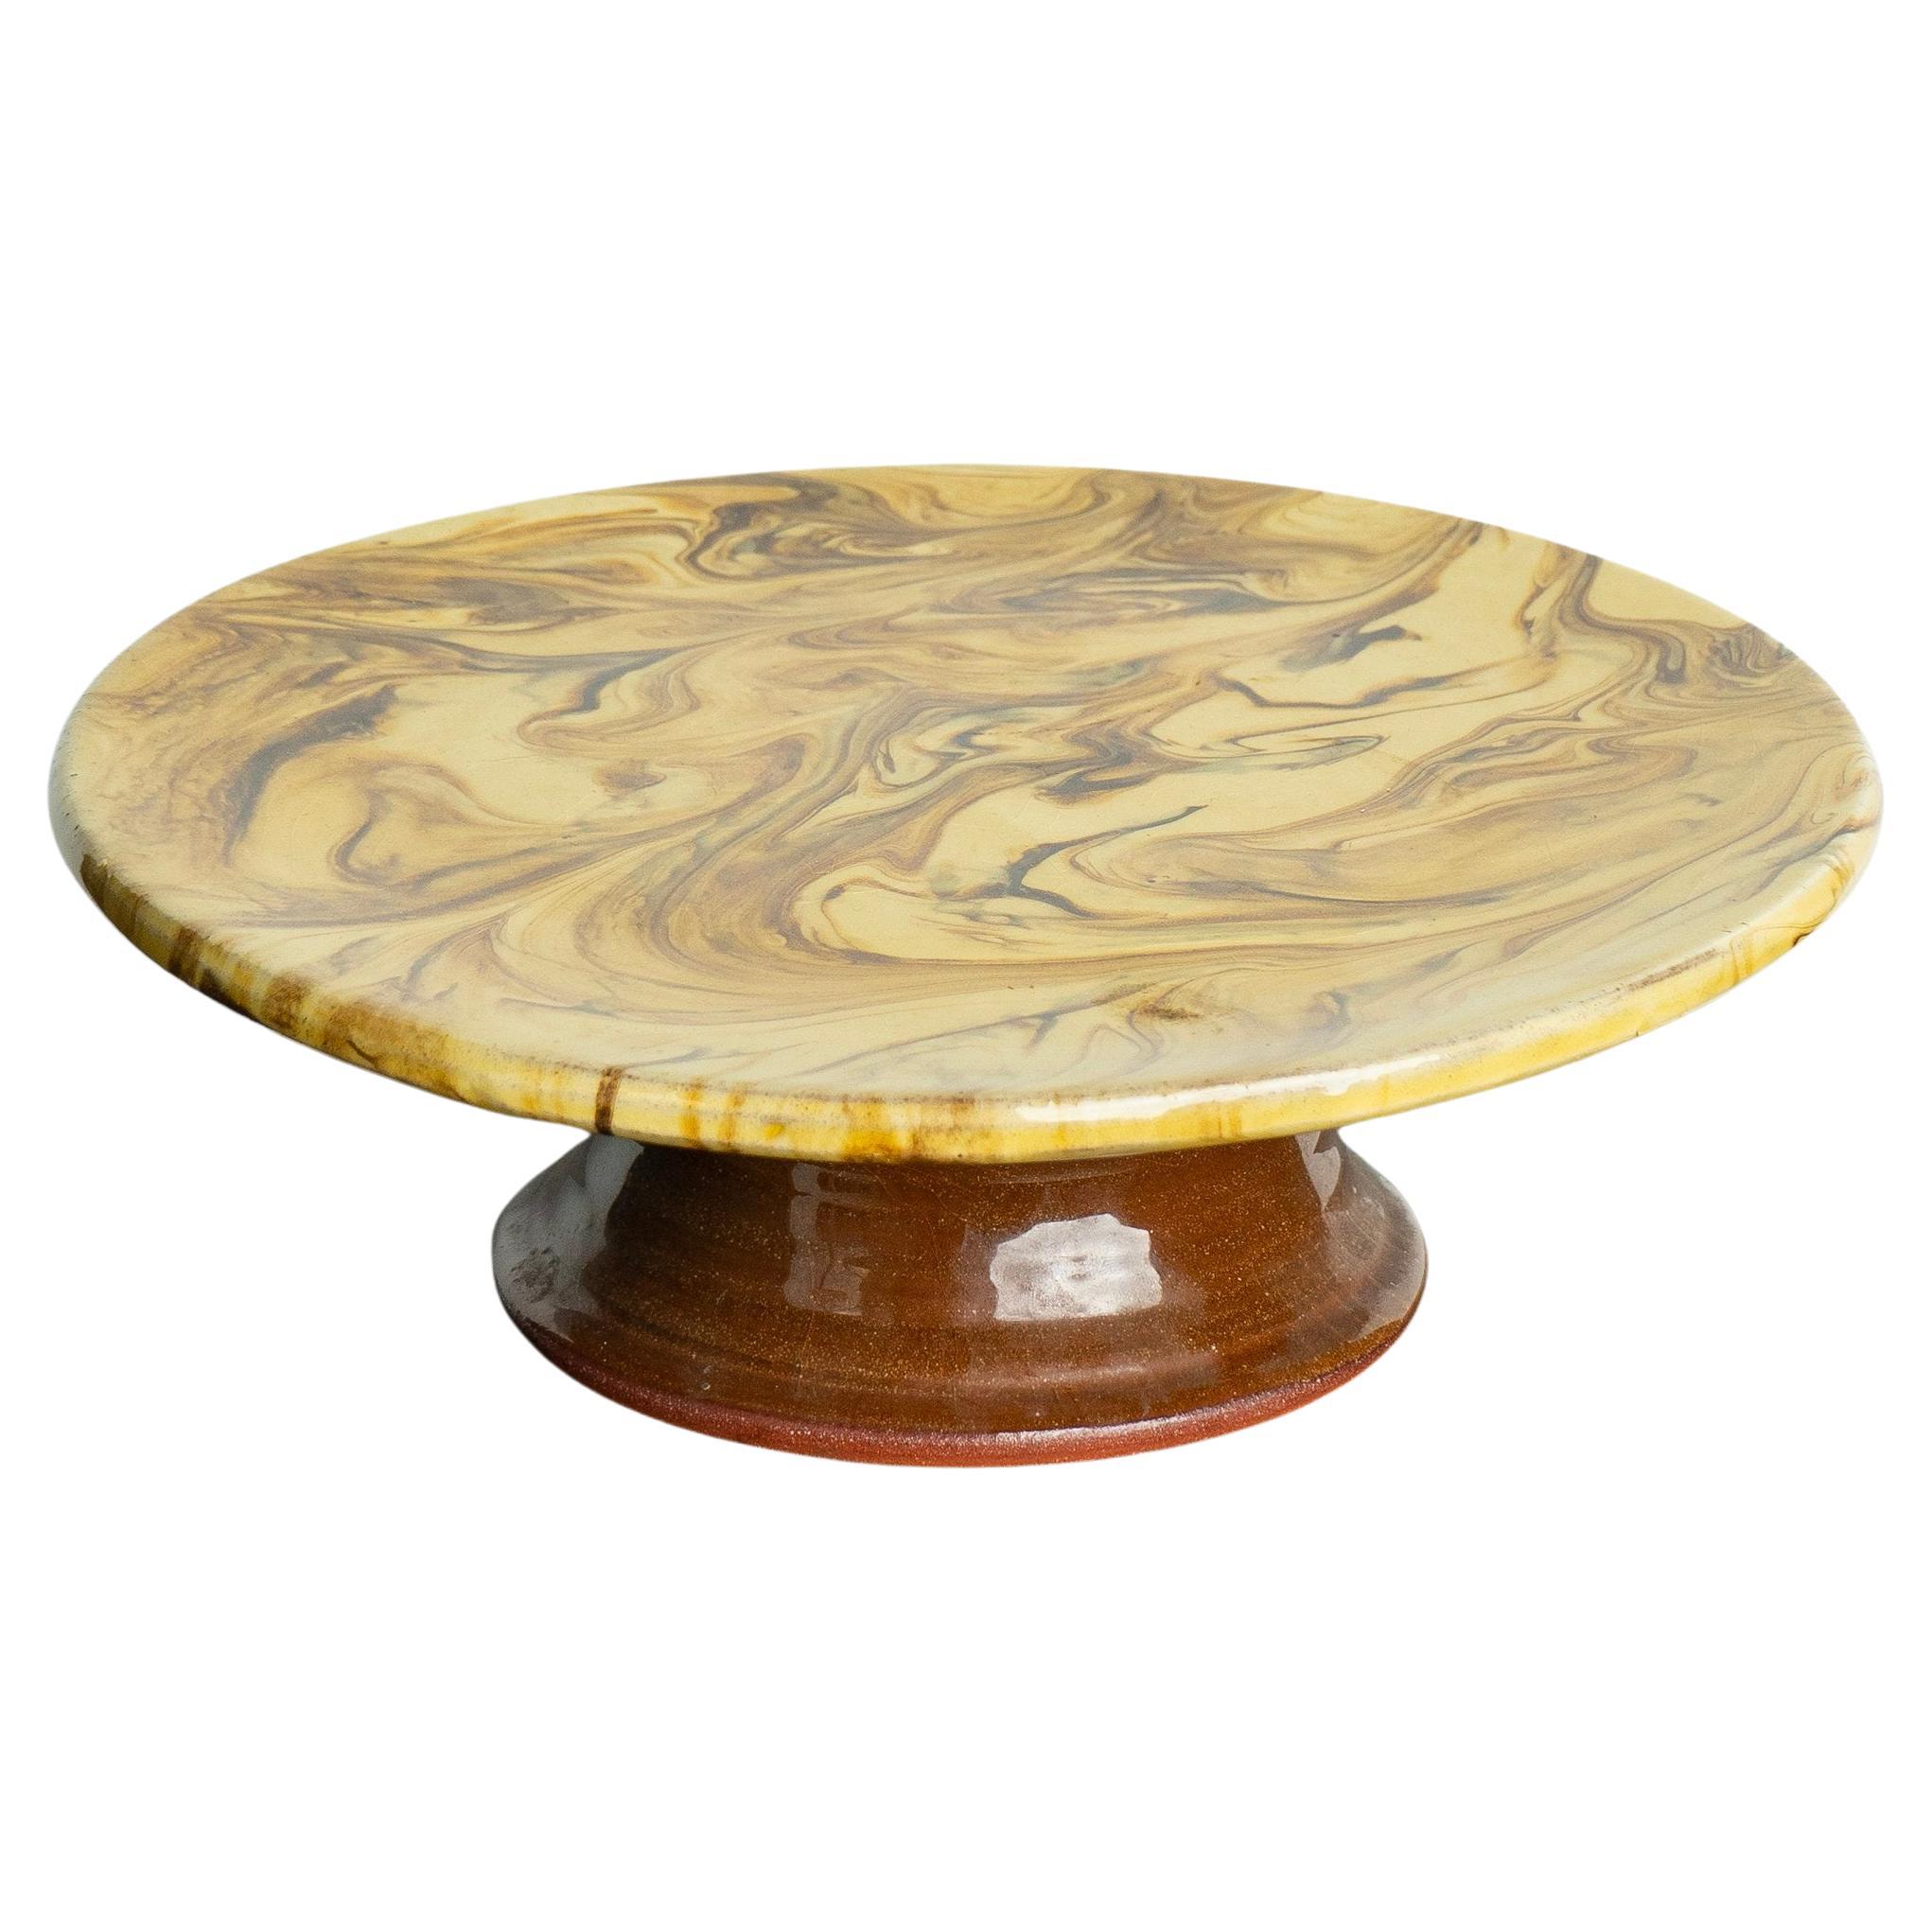 Buckley Pottery Agate Ware Cake Stand, Early 20th Century